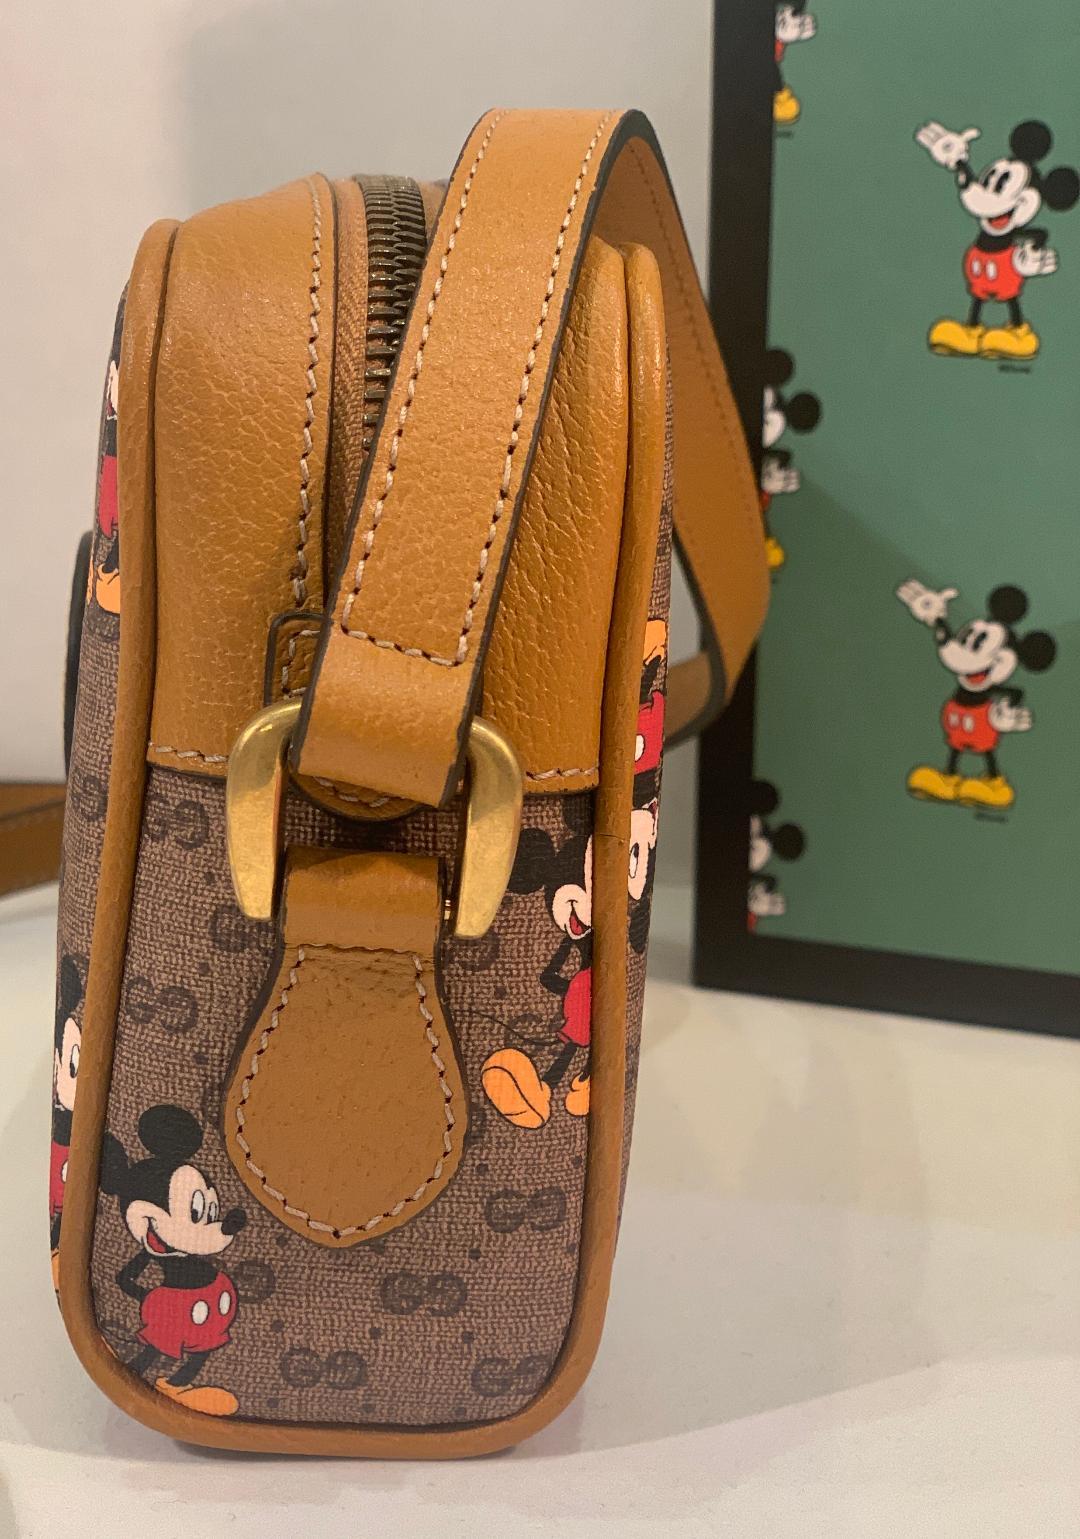 SOLD OUT Gucci Mickey Mouse Year of the Rat Crossbody Shoulder Bag Purse 1